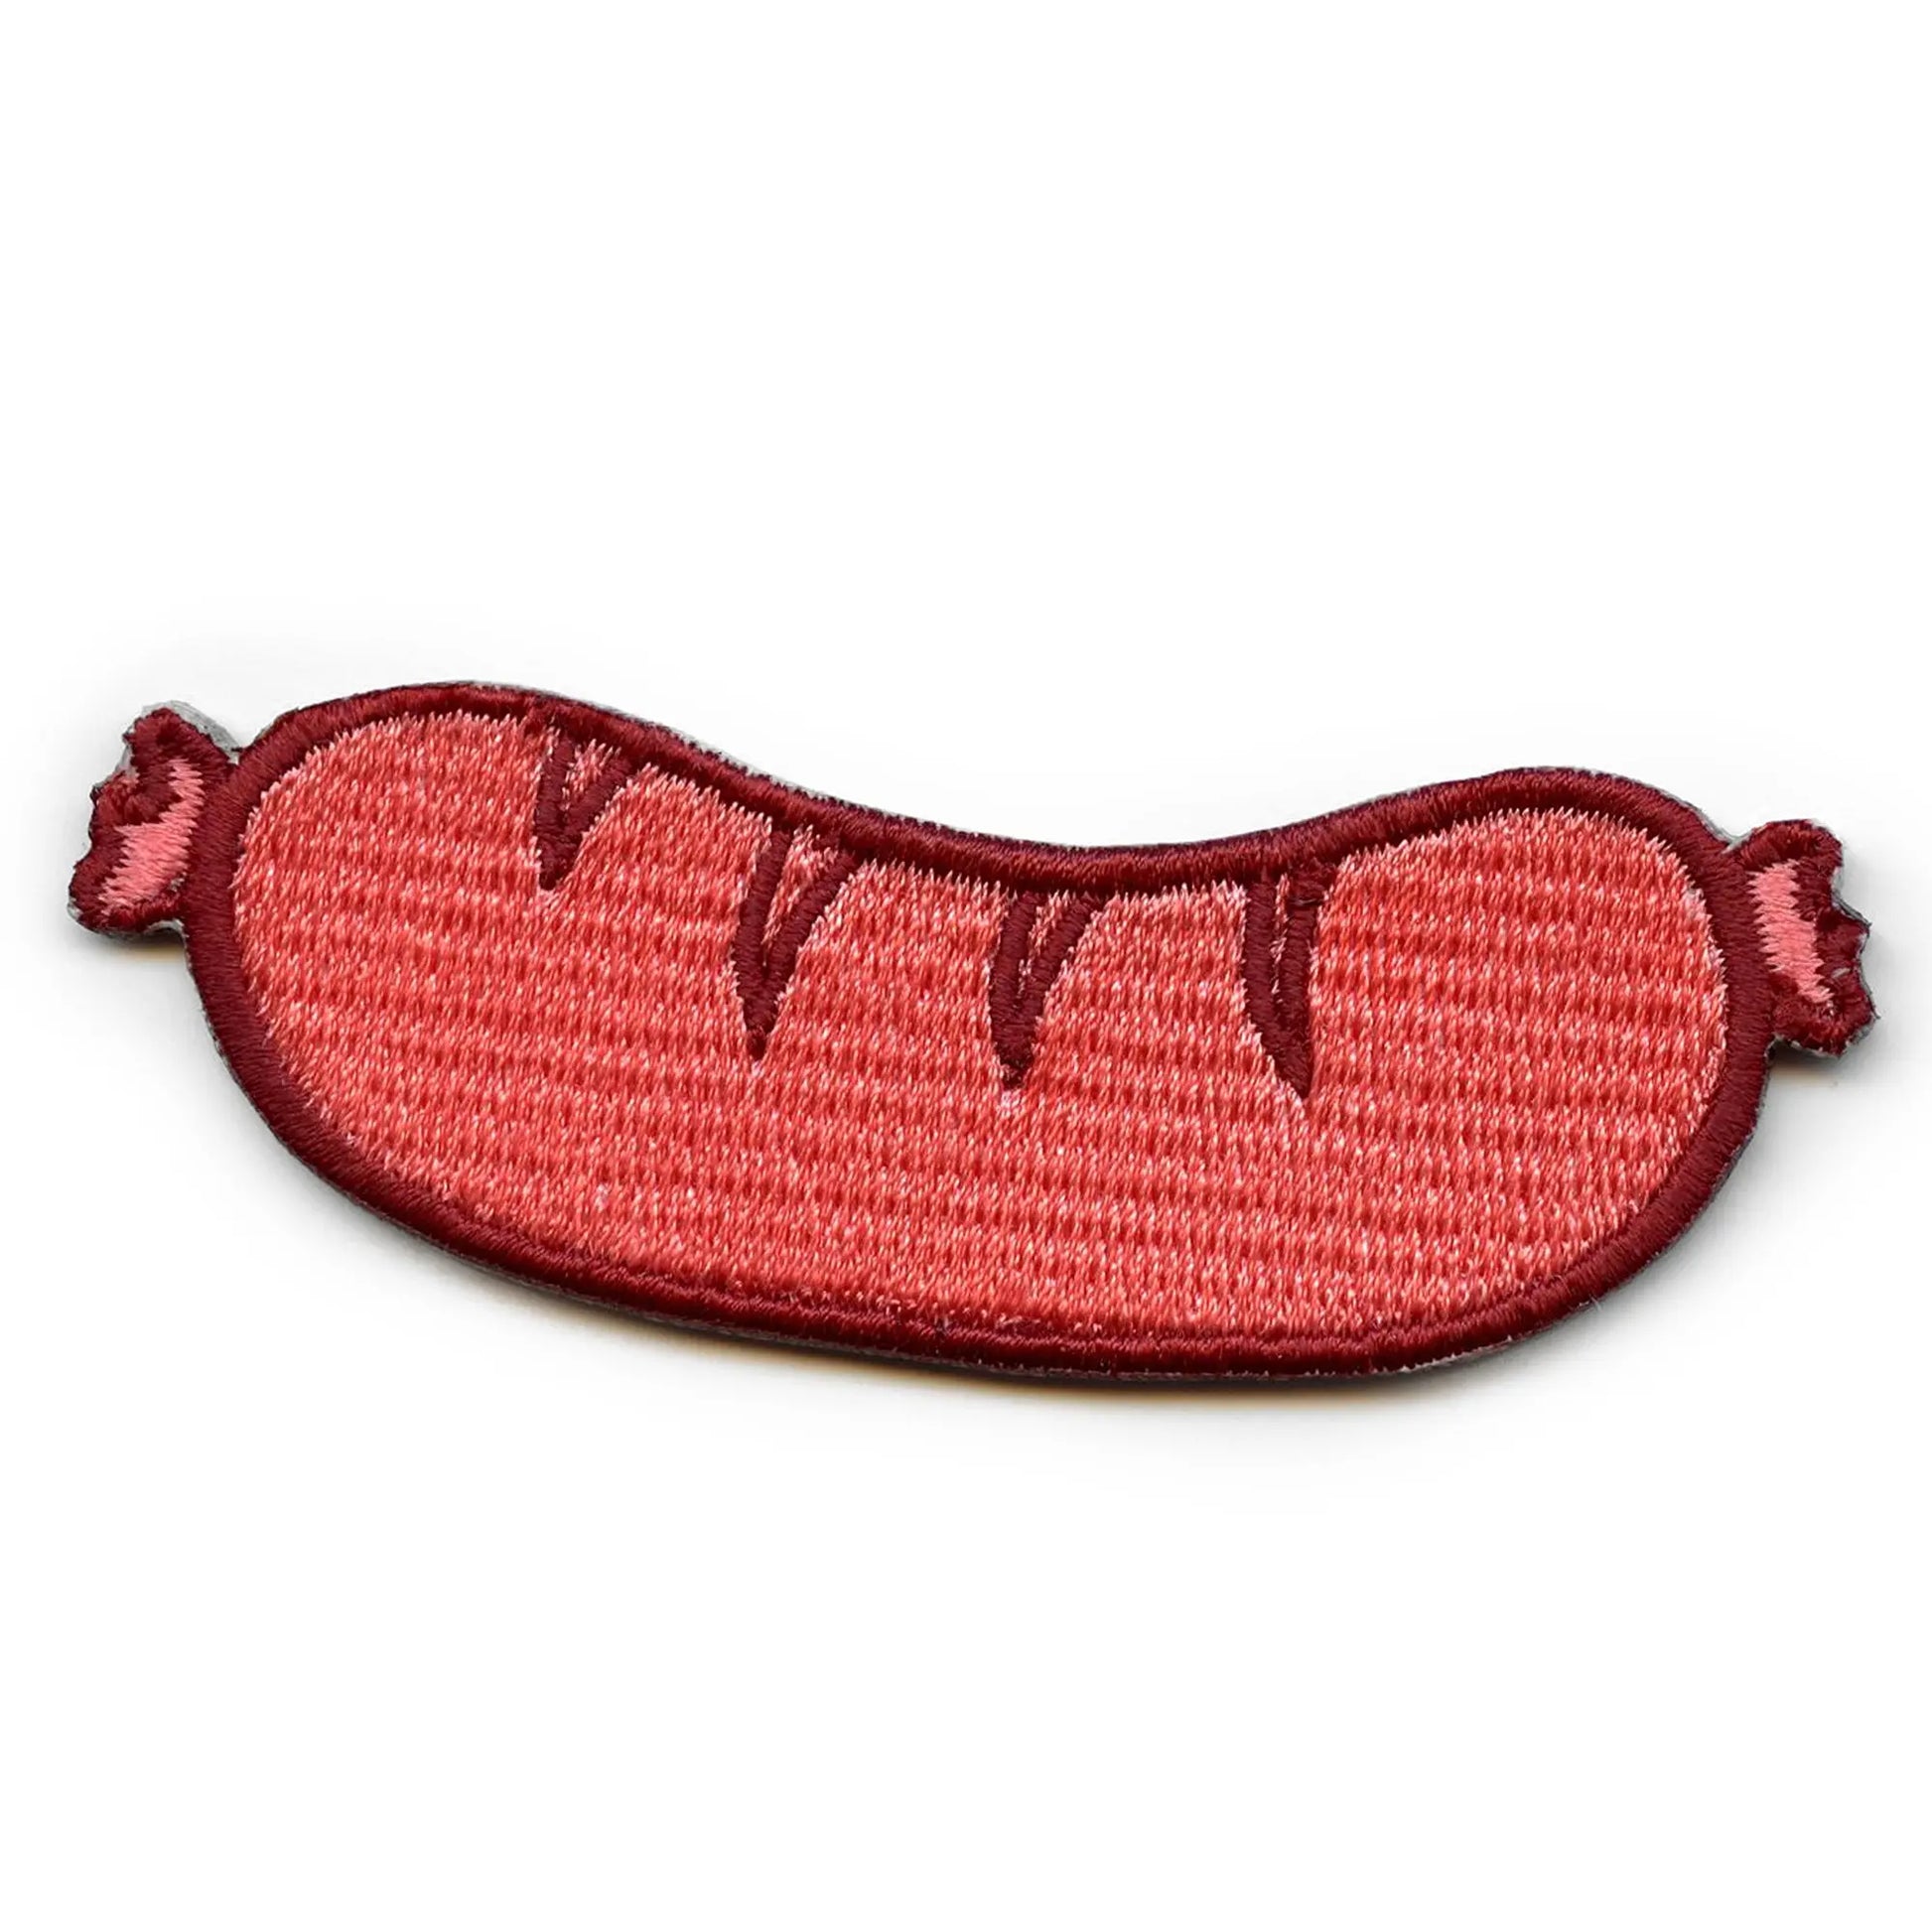 Sausage Link Food Emoji Embroidered Iron On Patch 